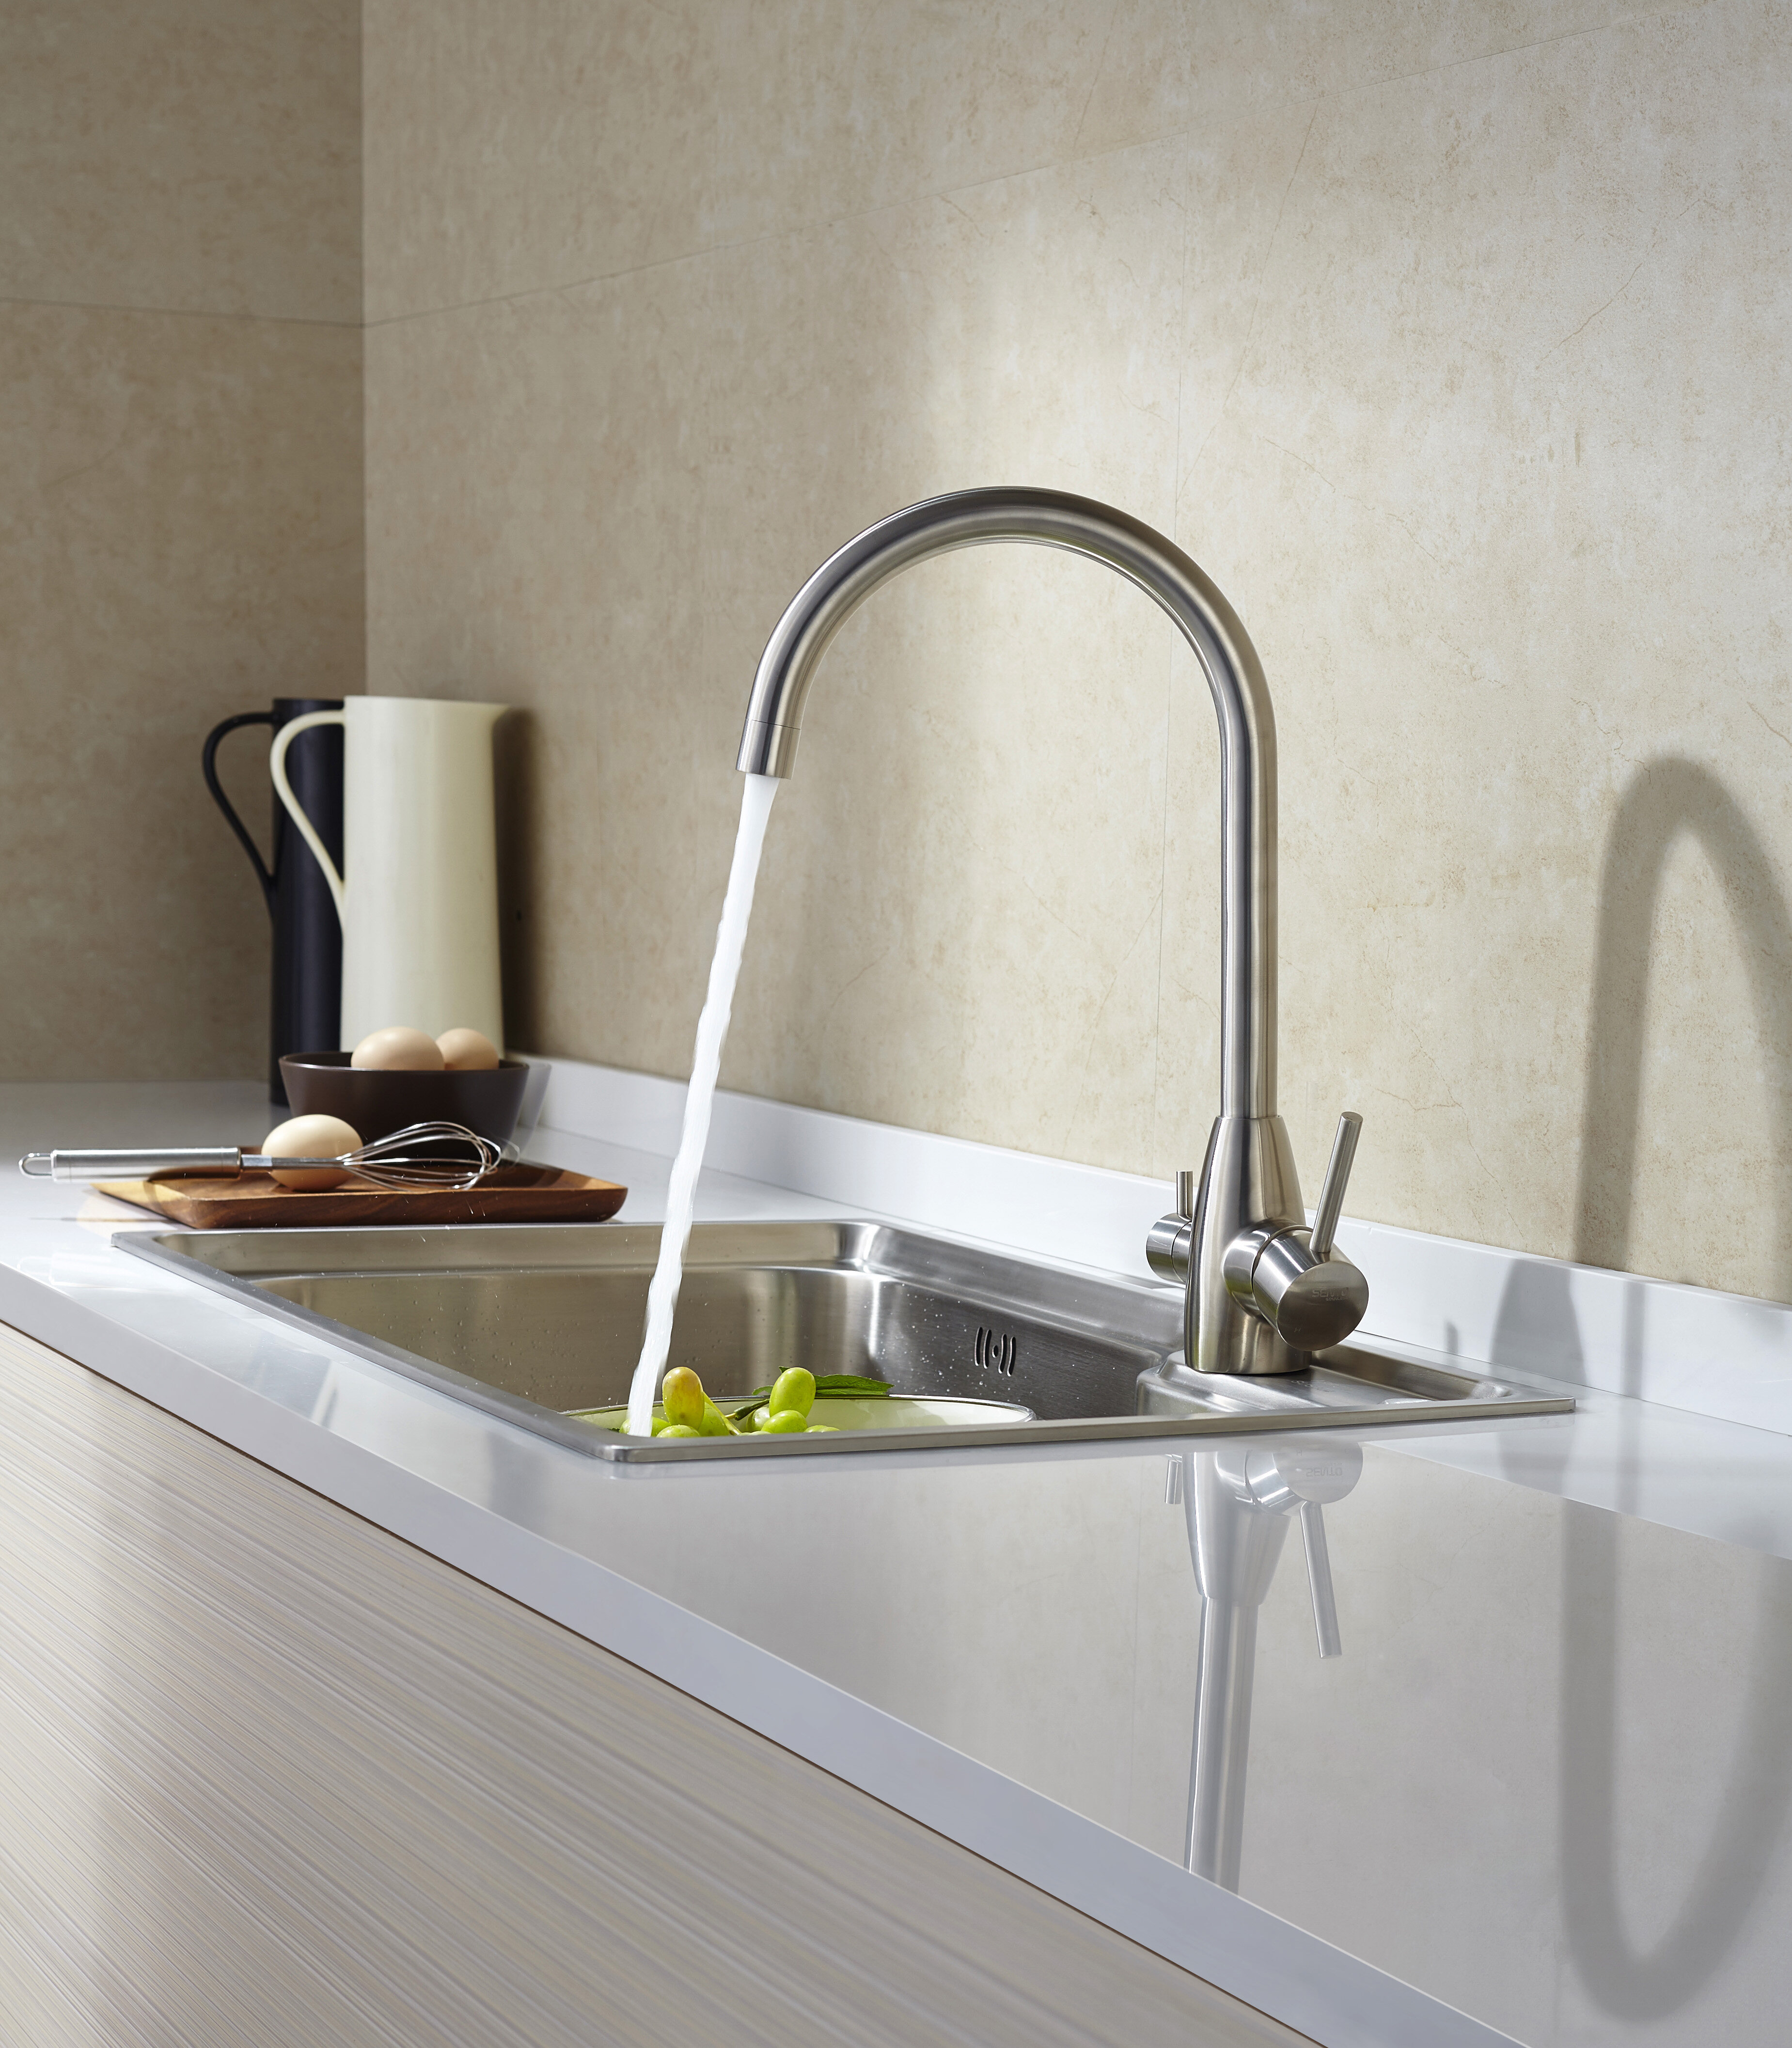 What Is A Commercial Kitchen Faucet?